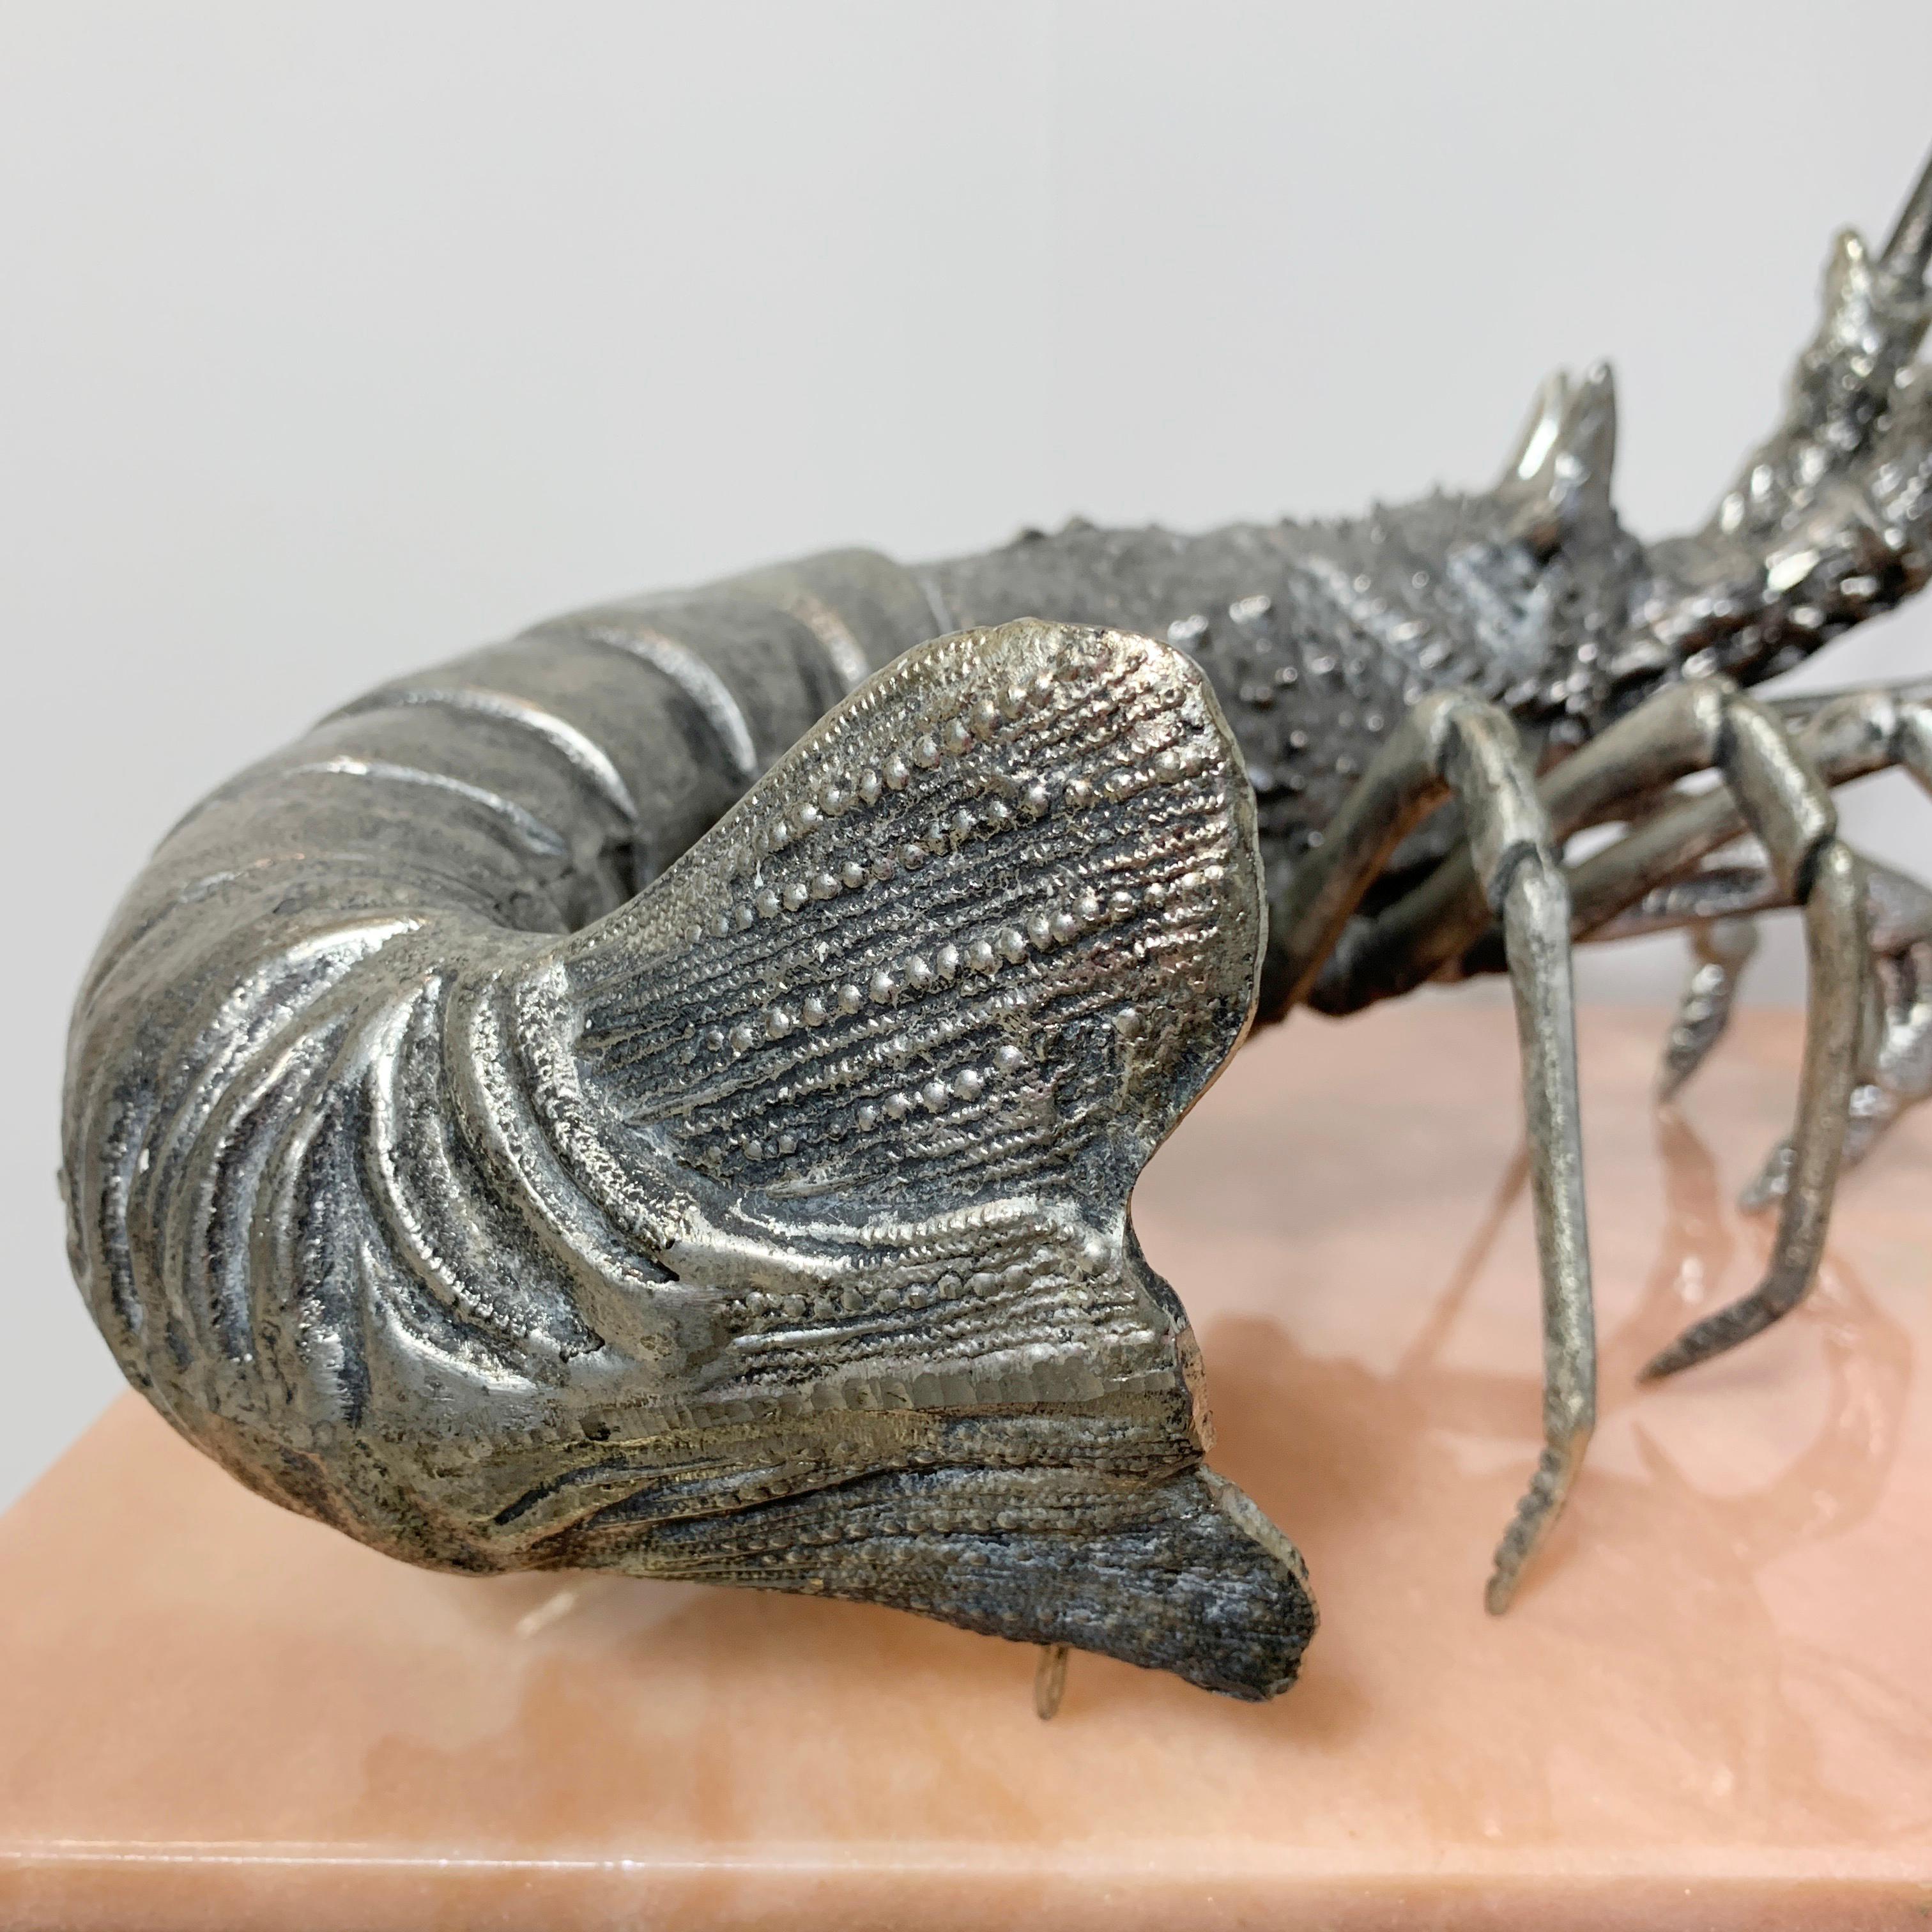 Italian Mauro Manetti Pewter Lobster Sculpture, Italy, 1950s